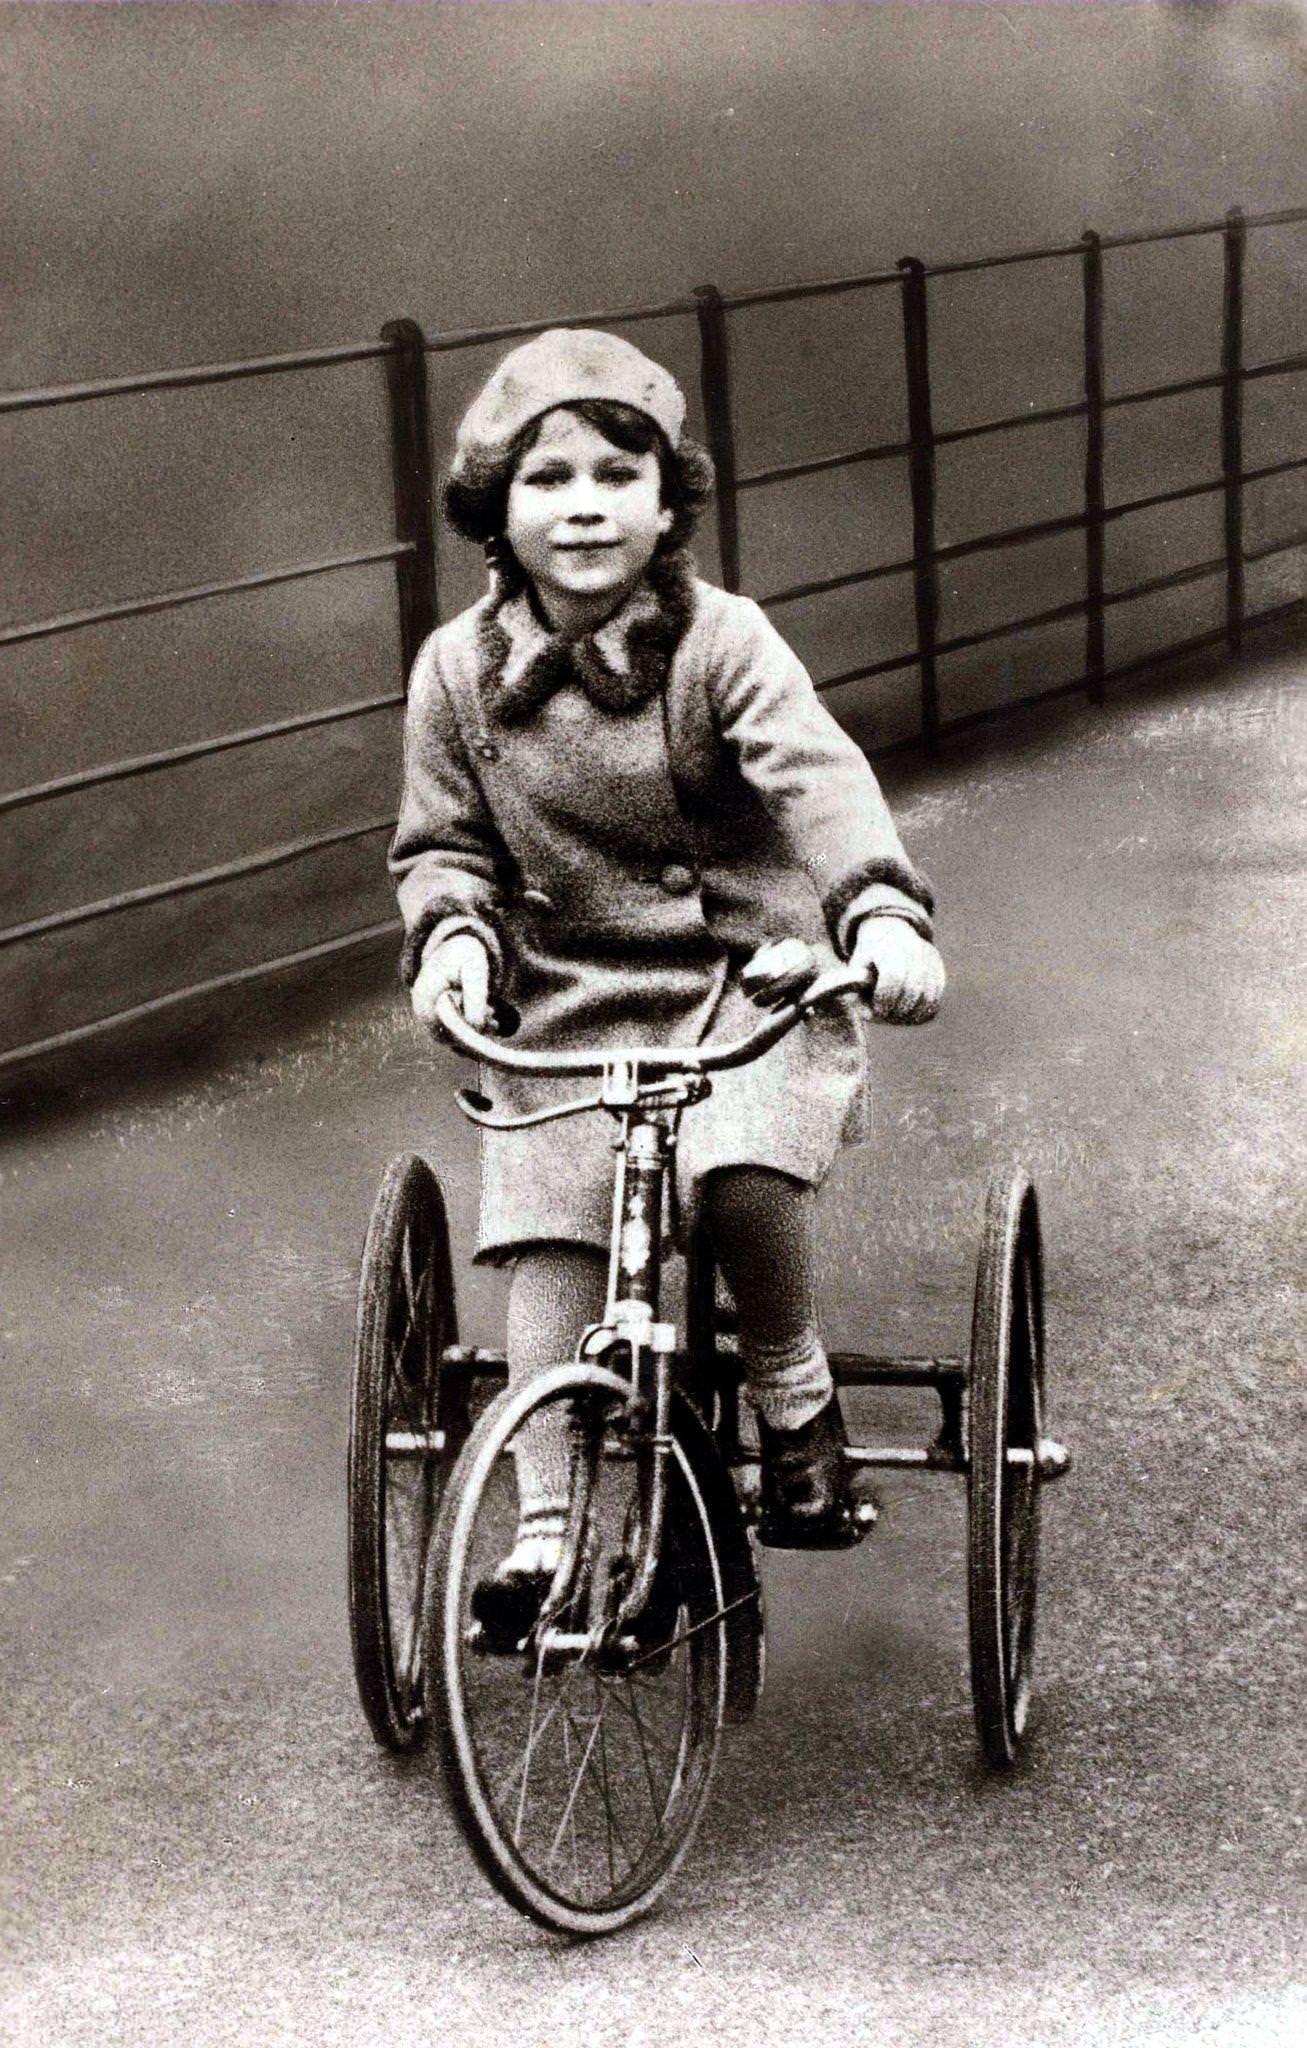 British Royalty, The young Princess Elizabeth is pictured riding on her tricycle, 1930.